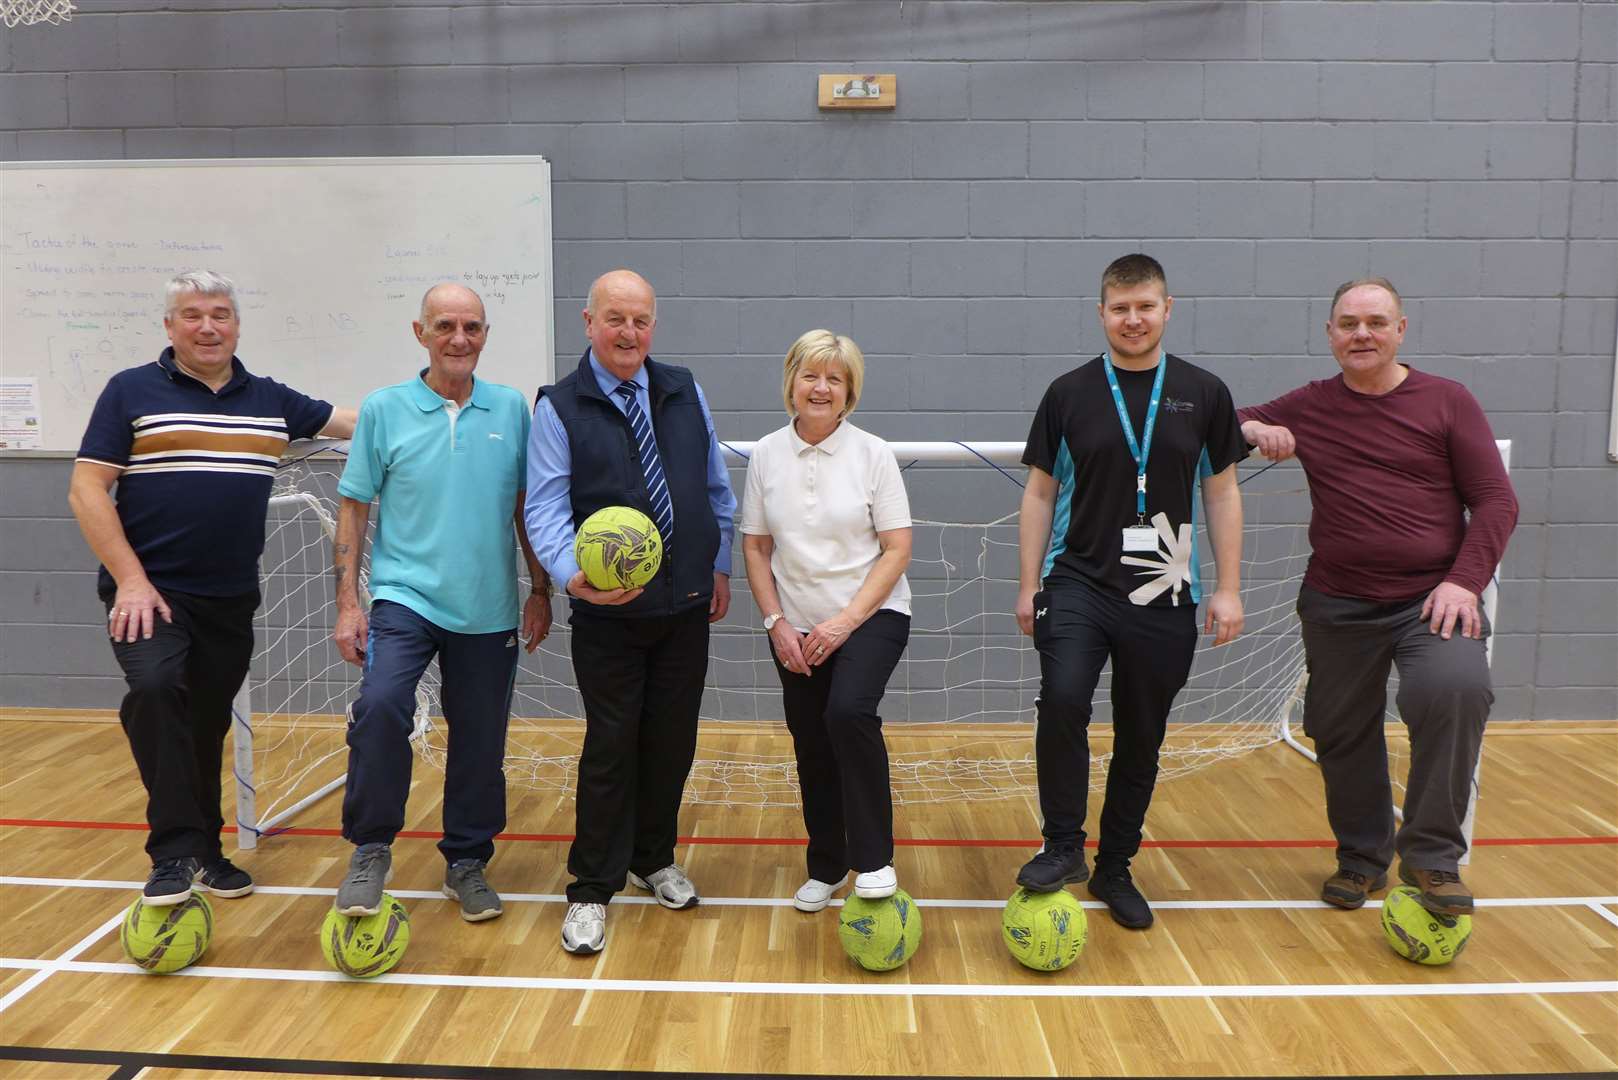 At the inaugural walking football event are (from left) Colin Stewart, Alan Farquhar, Willie Mackay, Glynis Mackay, Alan Larnach (facilities manager at East Caithness Community Facility) and Bill Baxter.